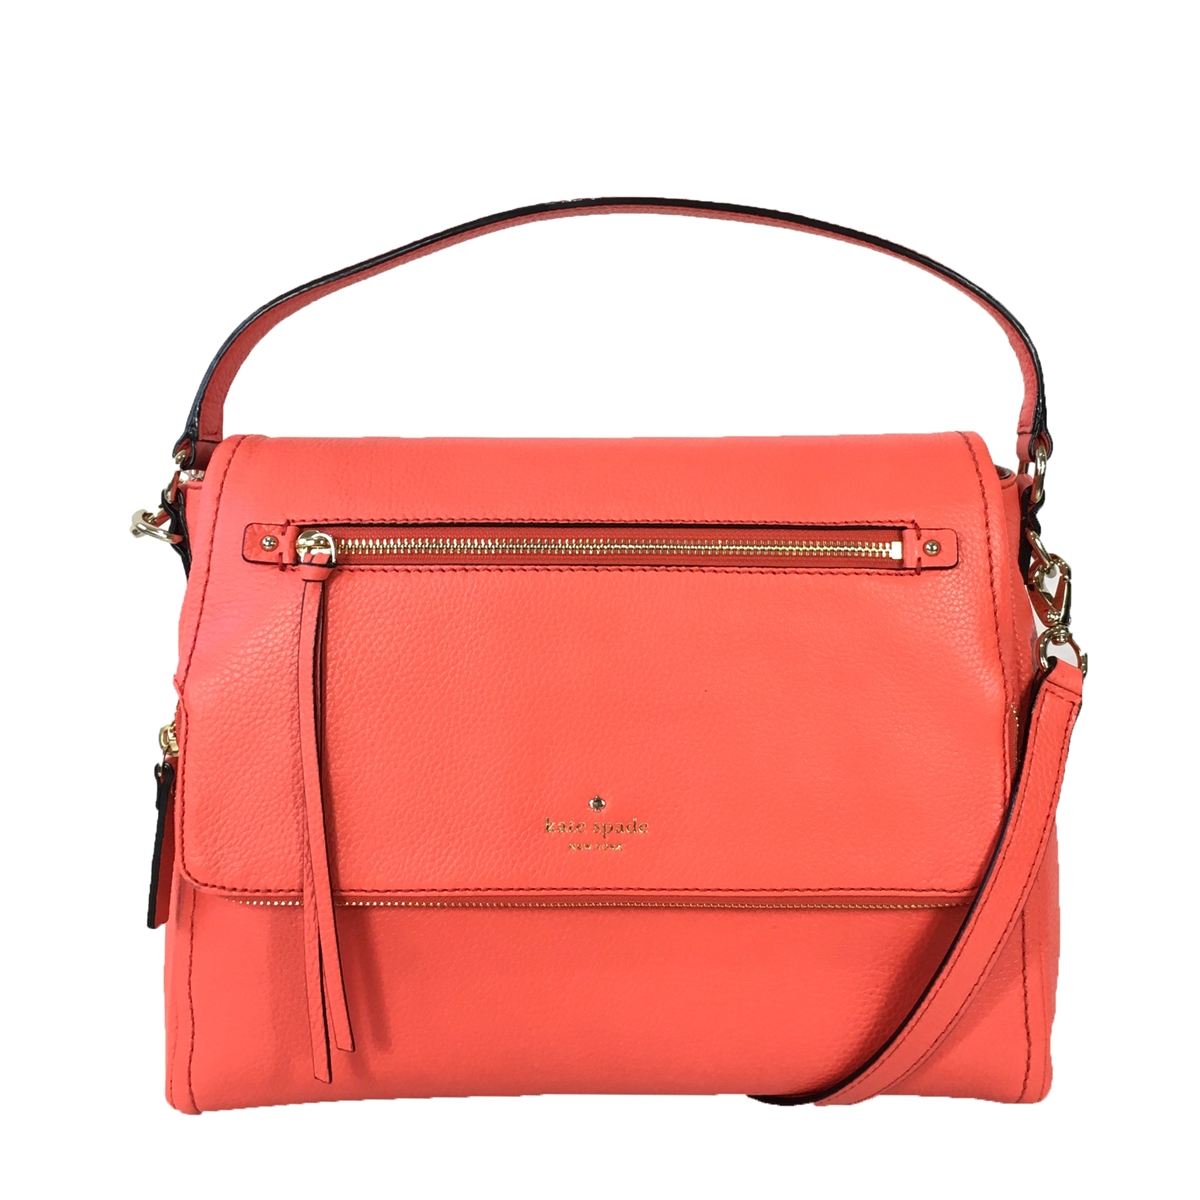 My perfect summer bag : Kate Spade Cobble Hill Small Toddy